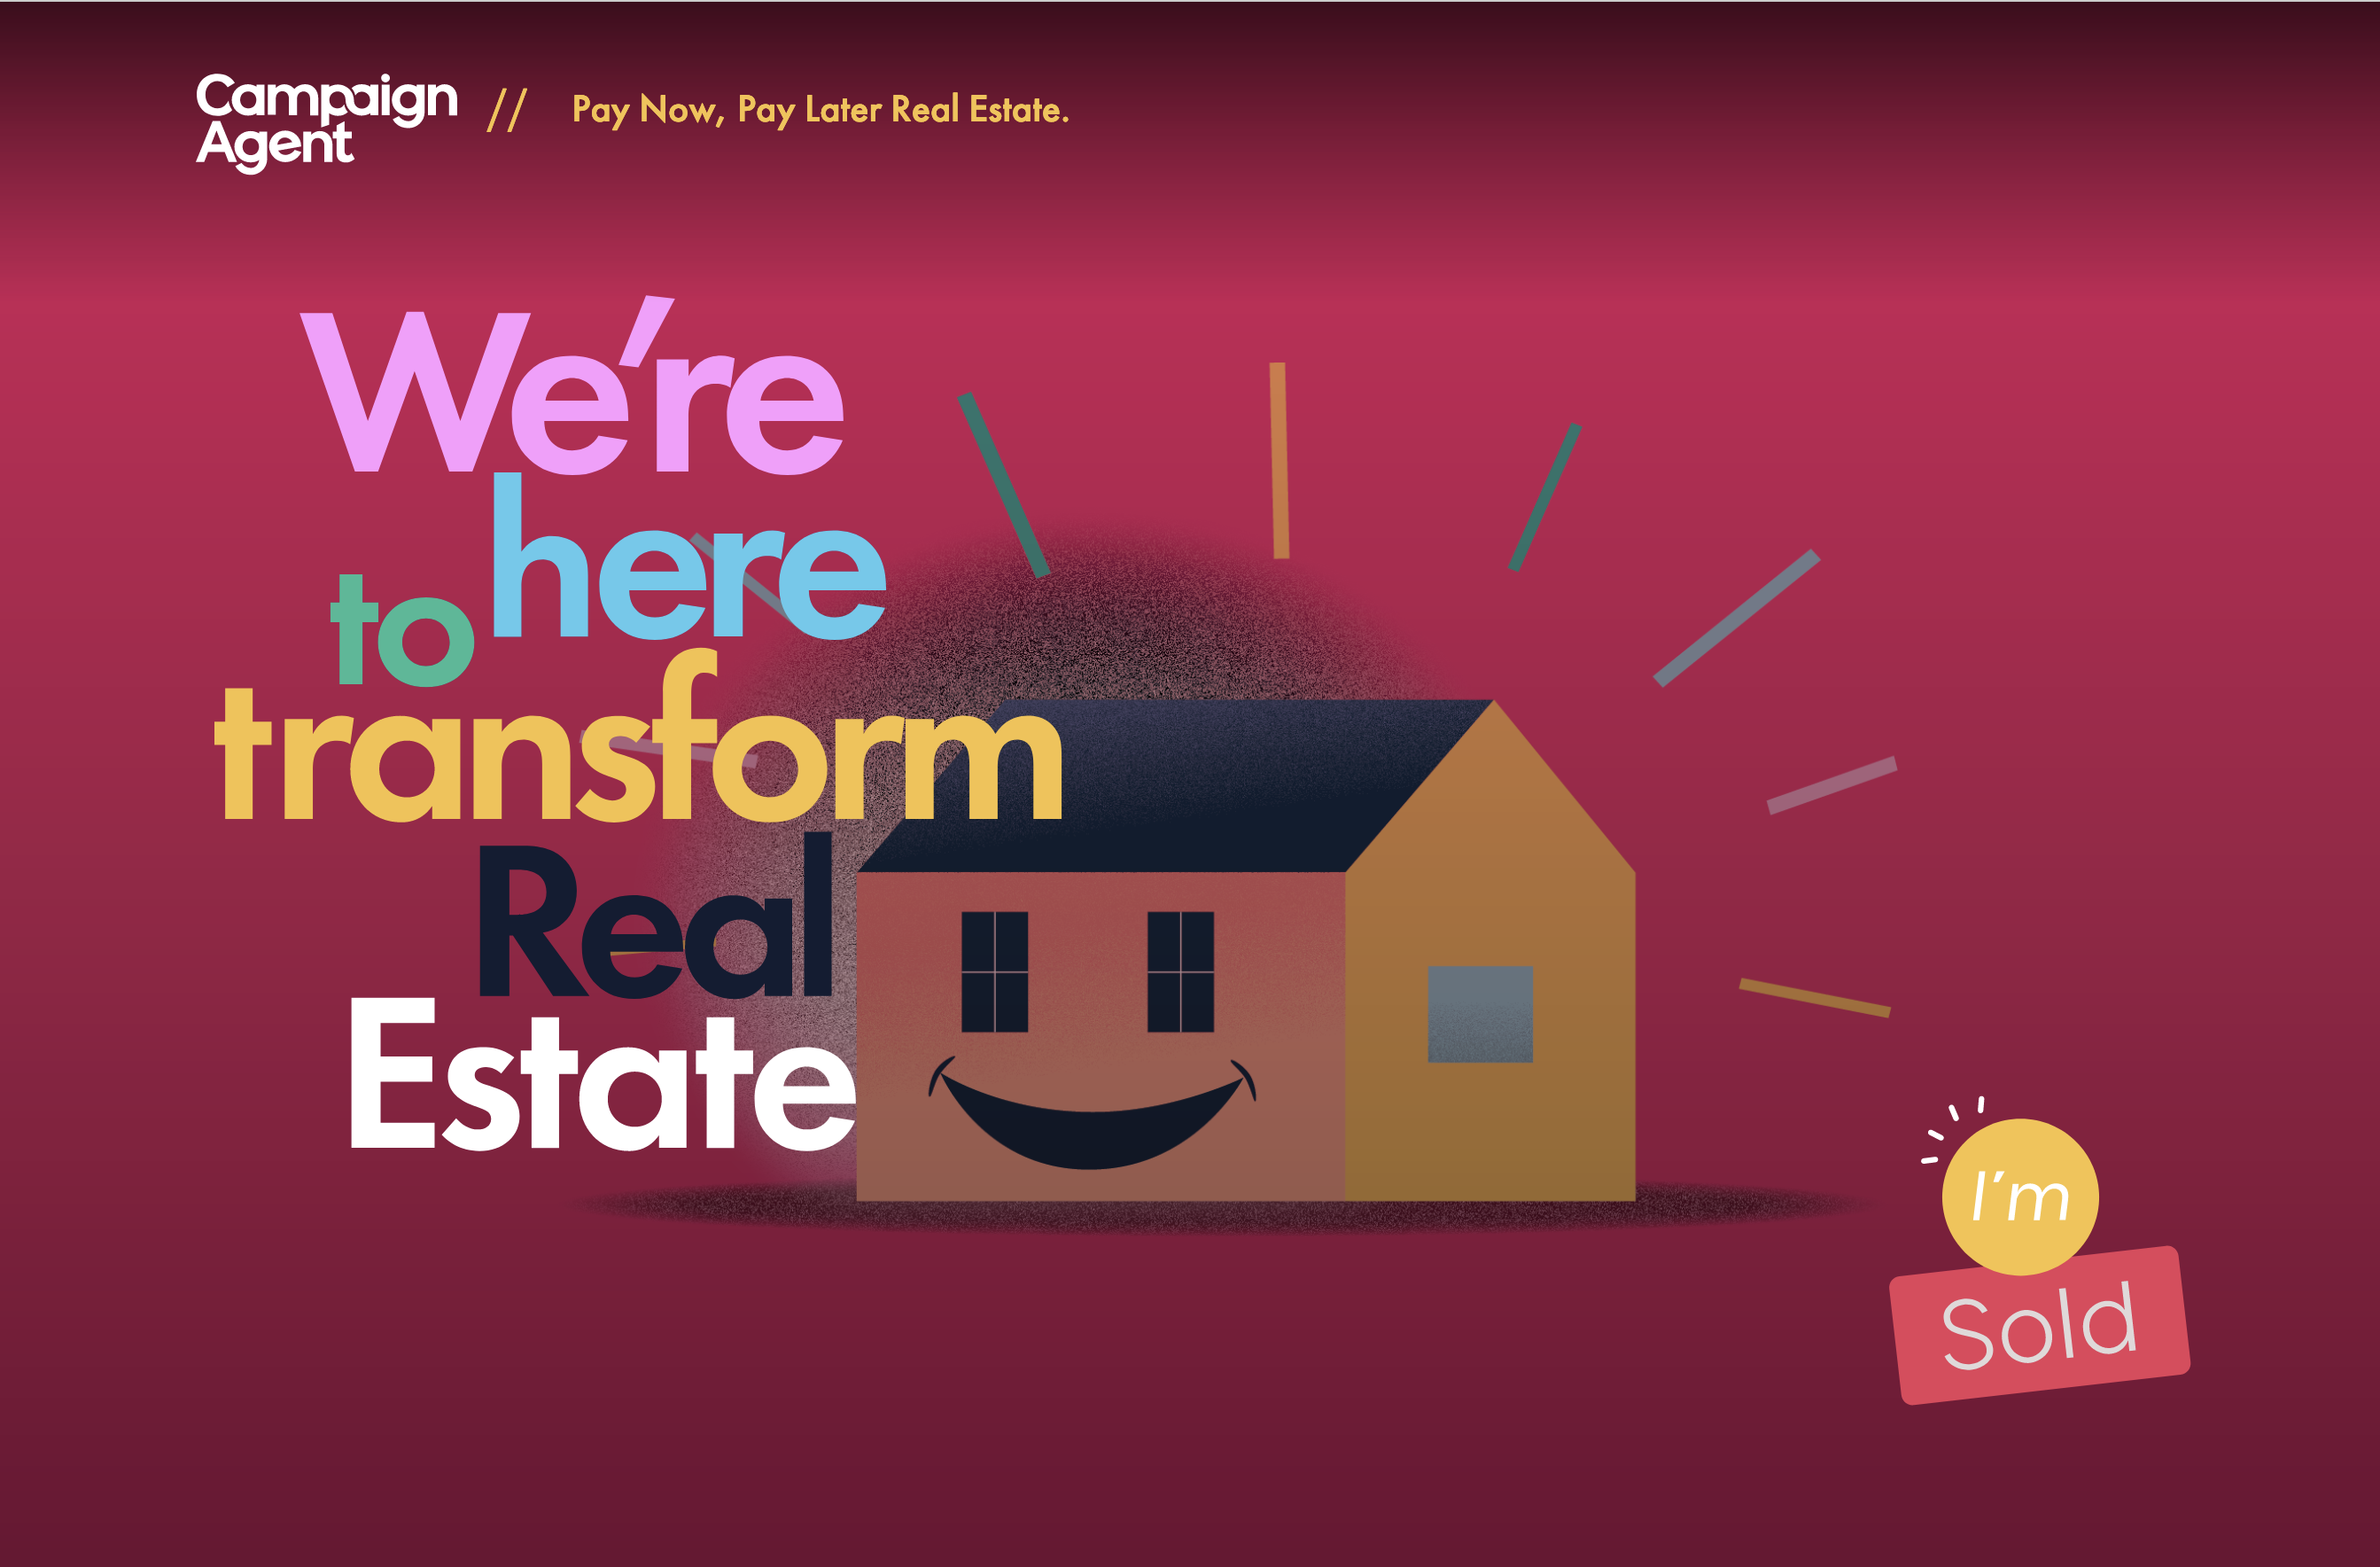 CampaignAgent is here to transform real estate in the new ‘I’m Sold’ brand campaign.